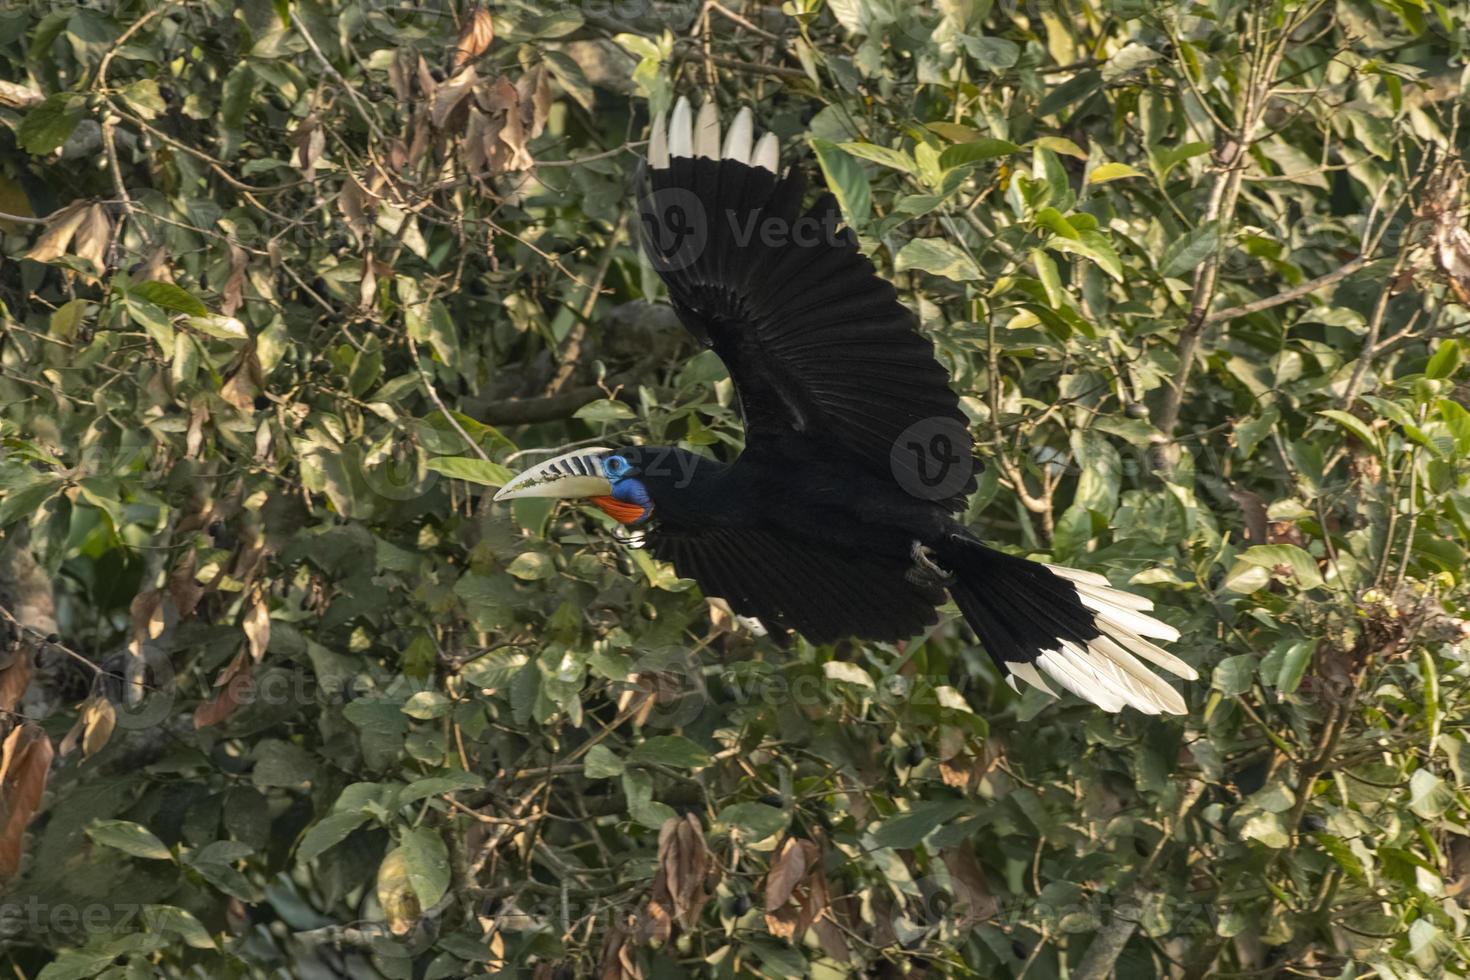 A female rufous-necked hornbill or Aceros nipalensis observed in Latpanchar in West Bengal, India photo